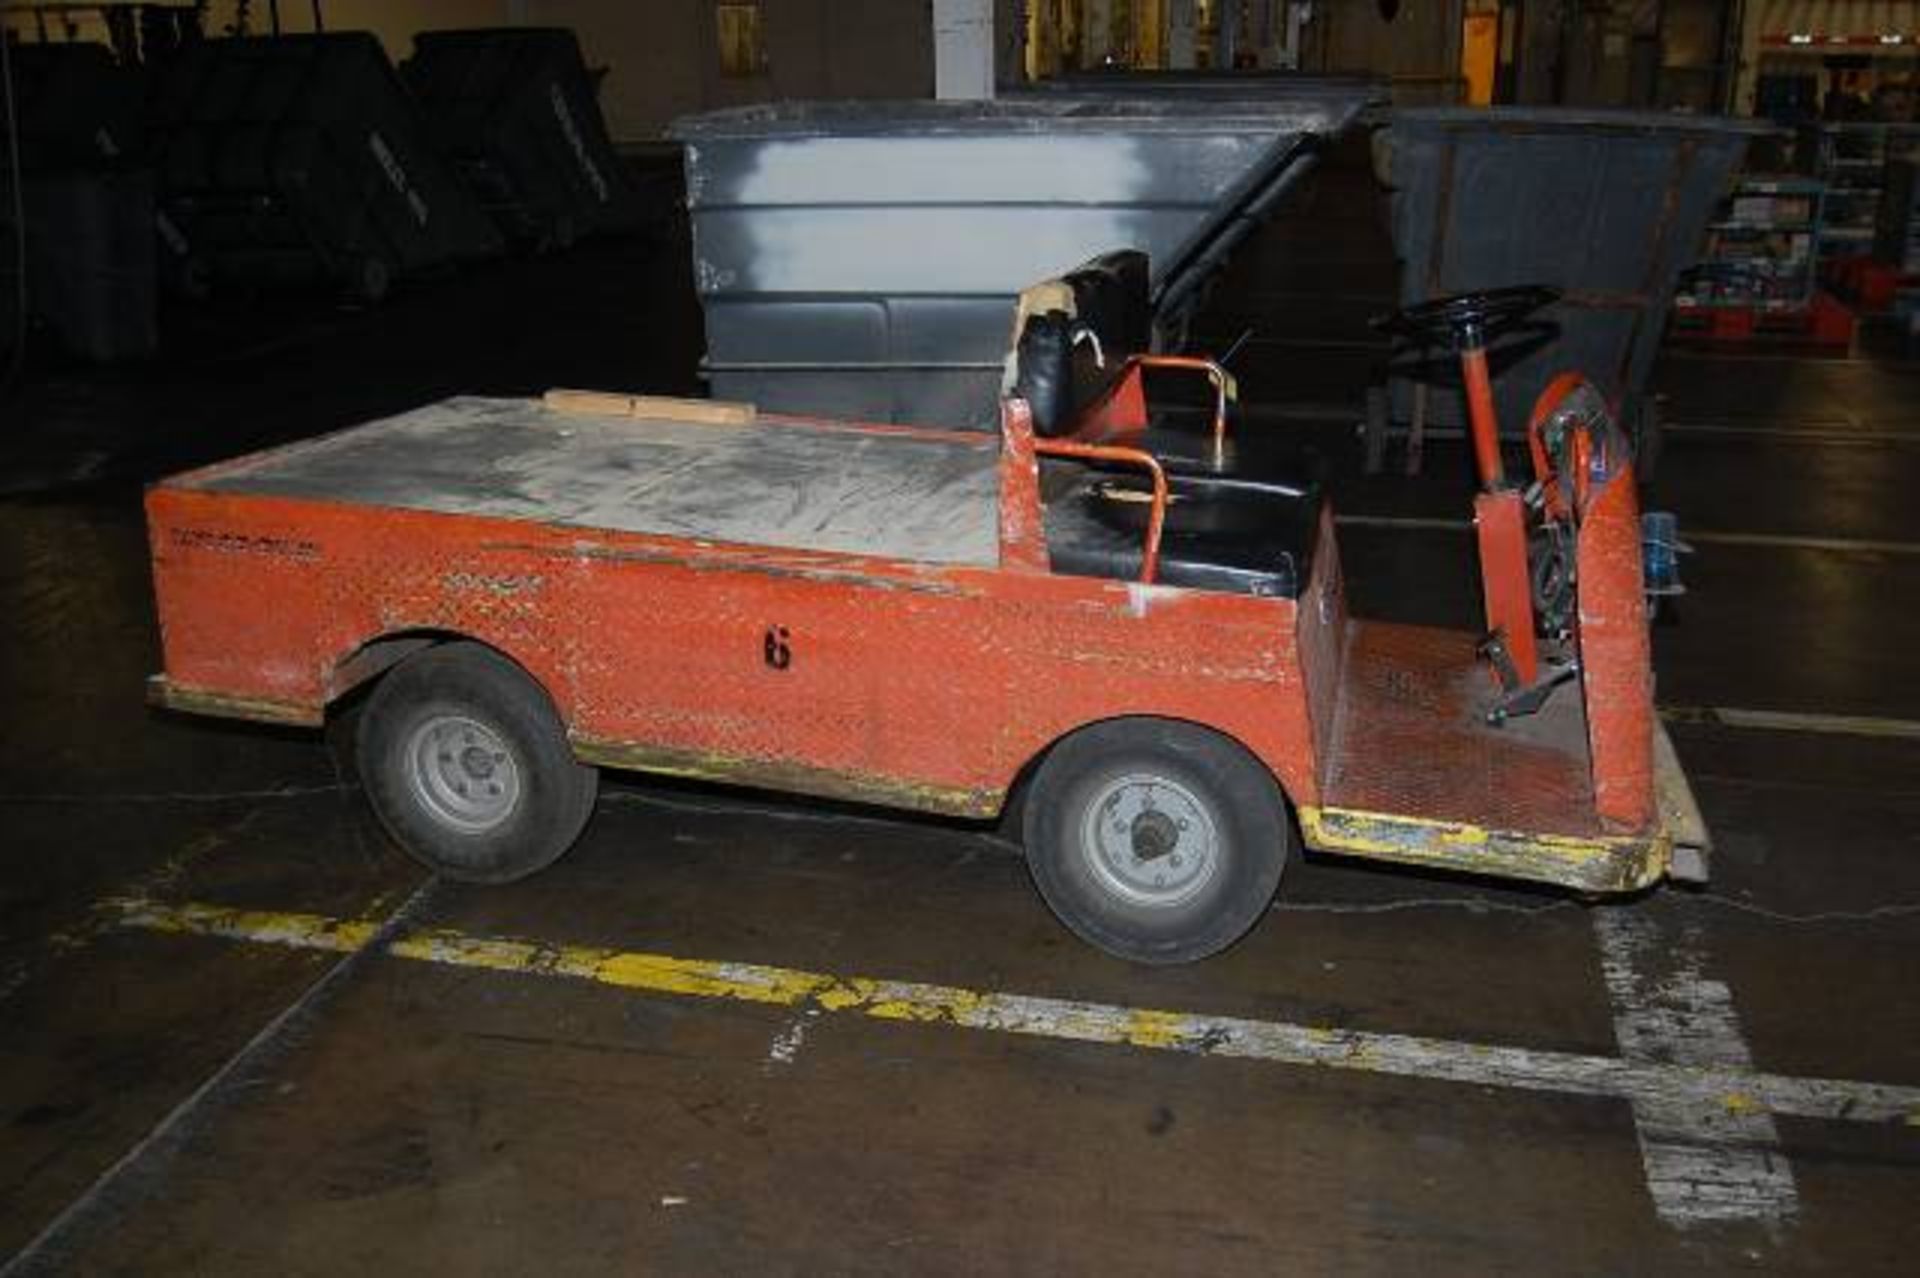 Taylor Dunn Electric Model BI-50 Utility Truck, 36 Volt, Battery Operated, SN 108302/ID #6 - Image 2 of 3